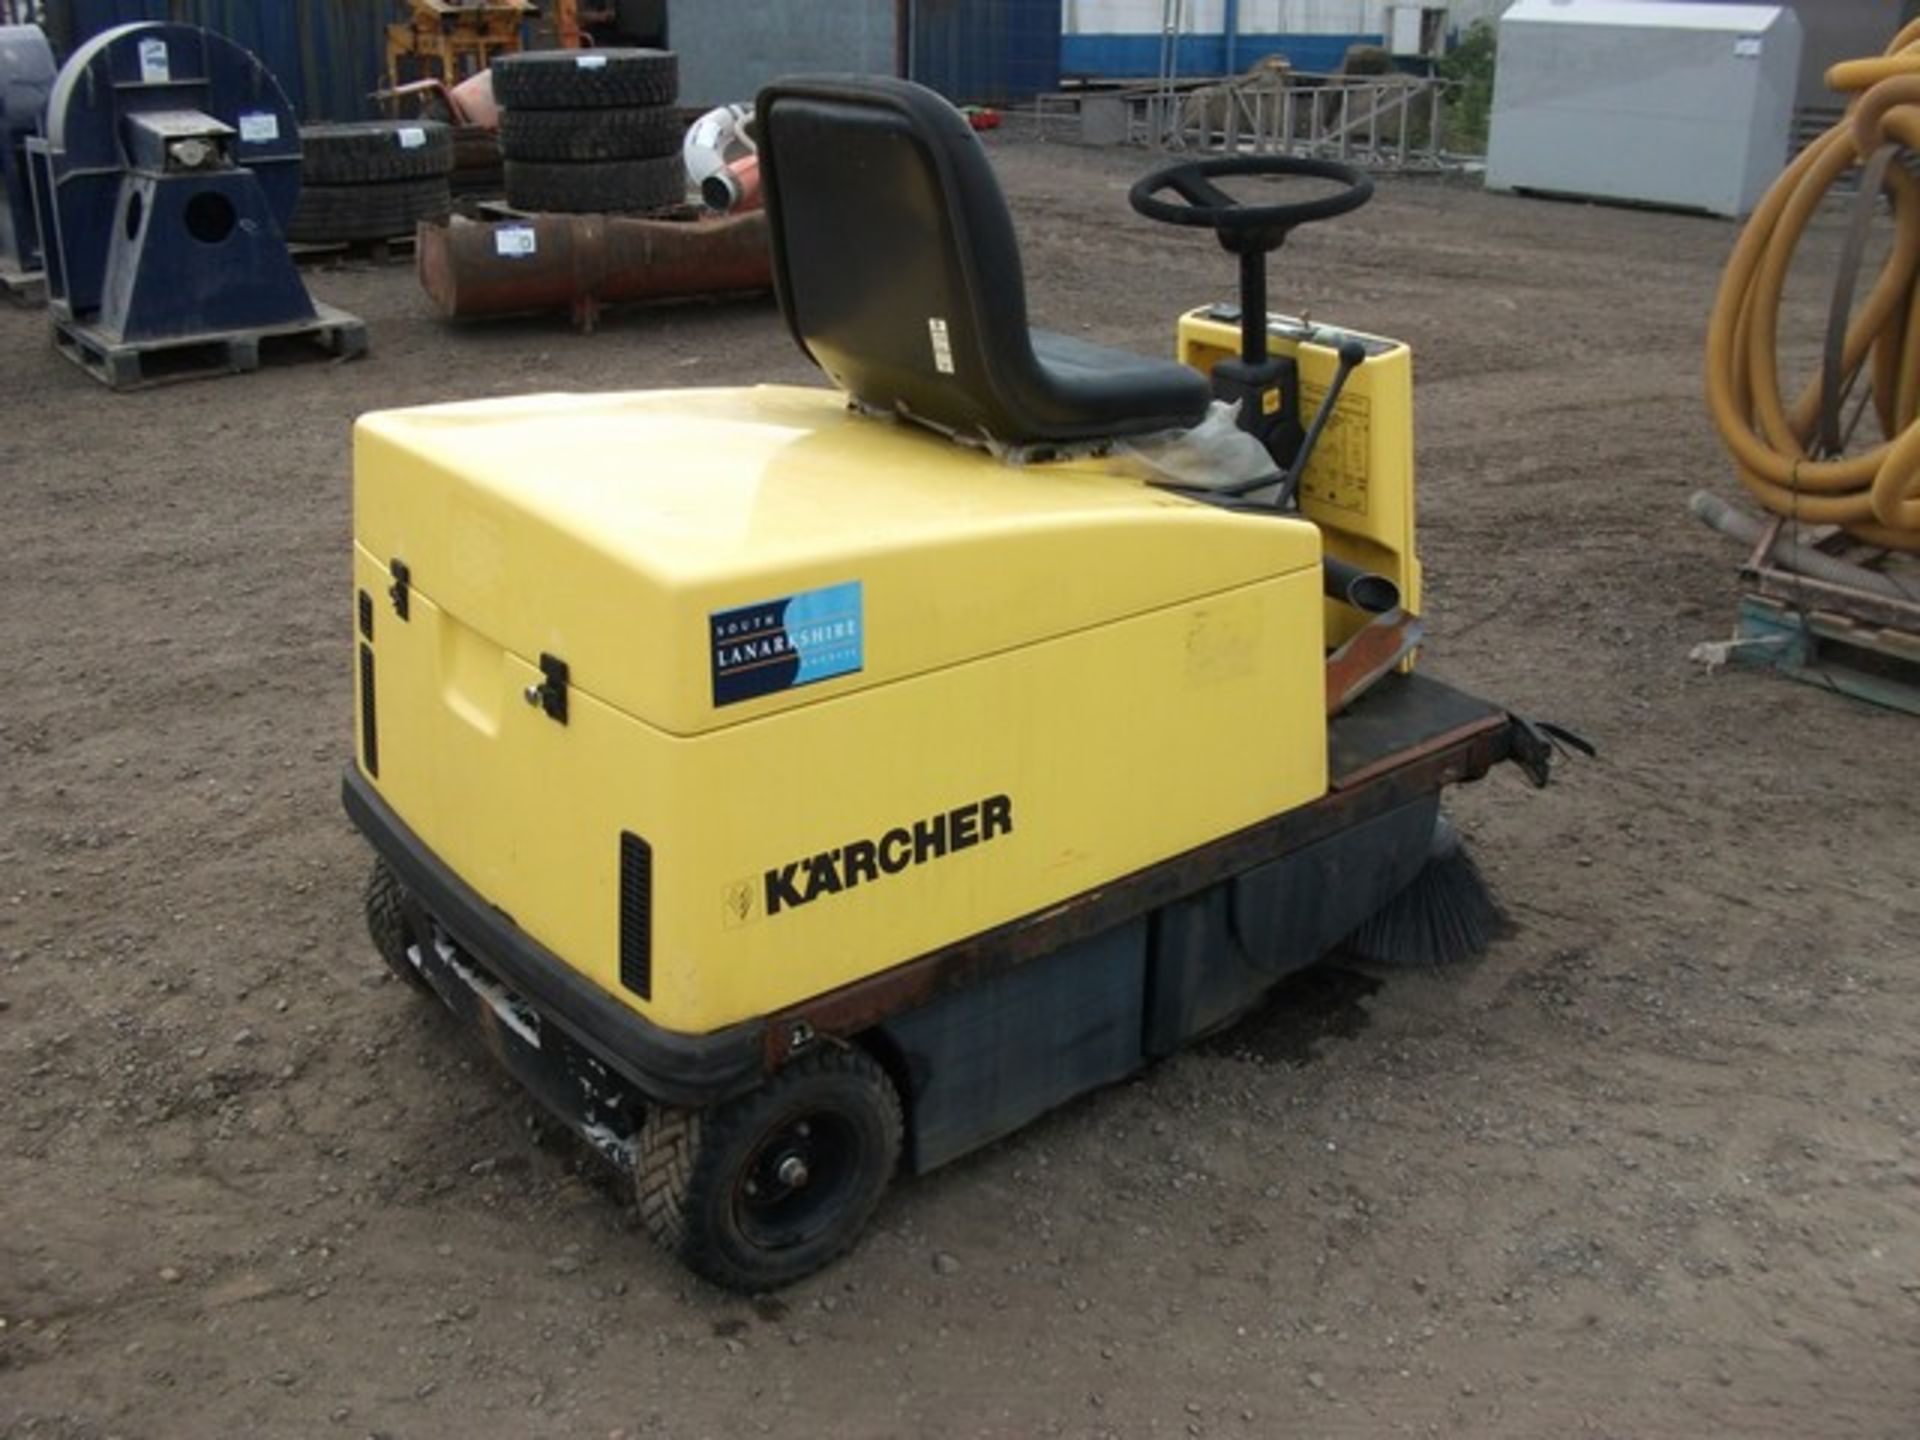 1997 KARCHER MINI RIDE ON SWEEPER, TYPE KMR 1200D, 78 HOURS (NOT VERIFIED) - Image 2 of 6